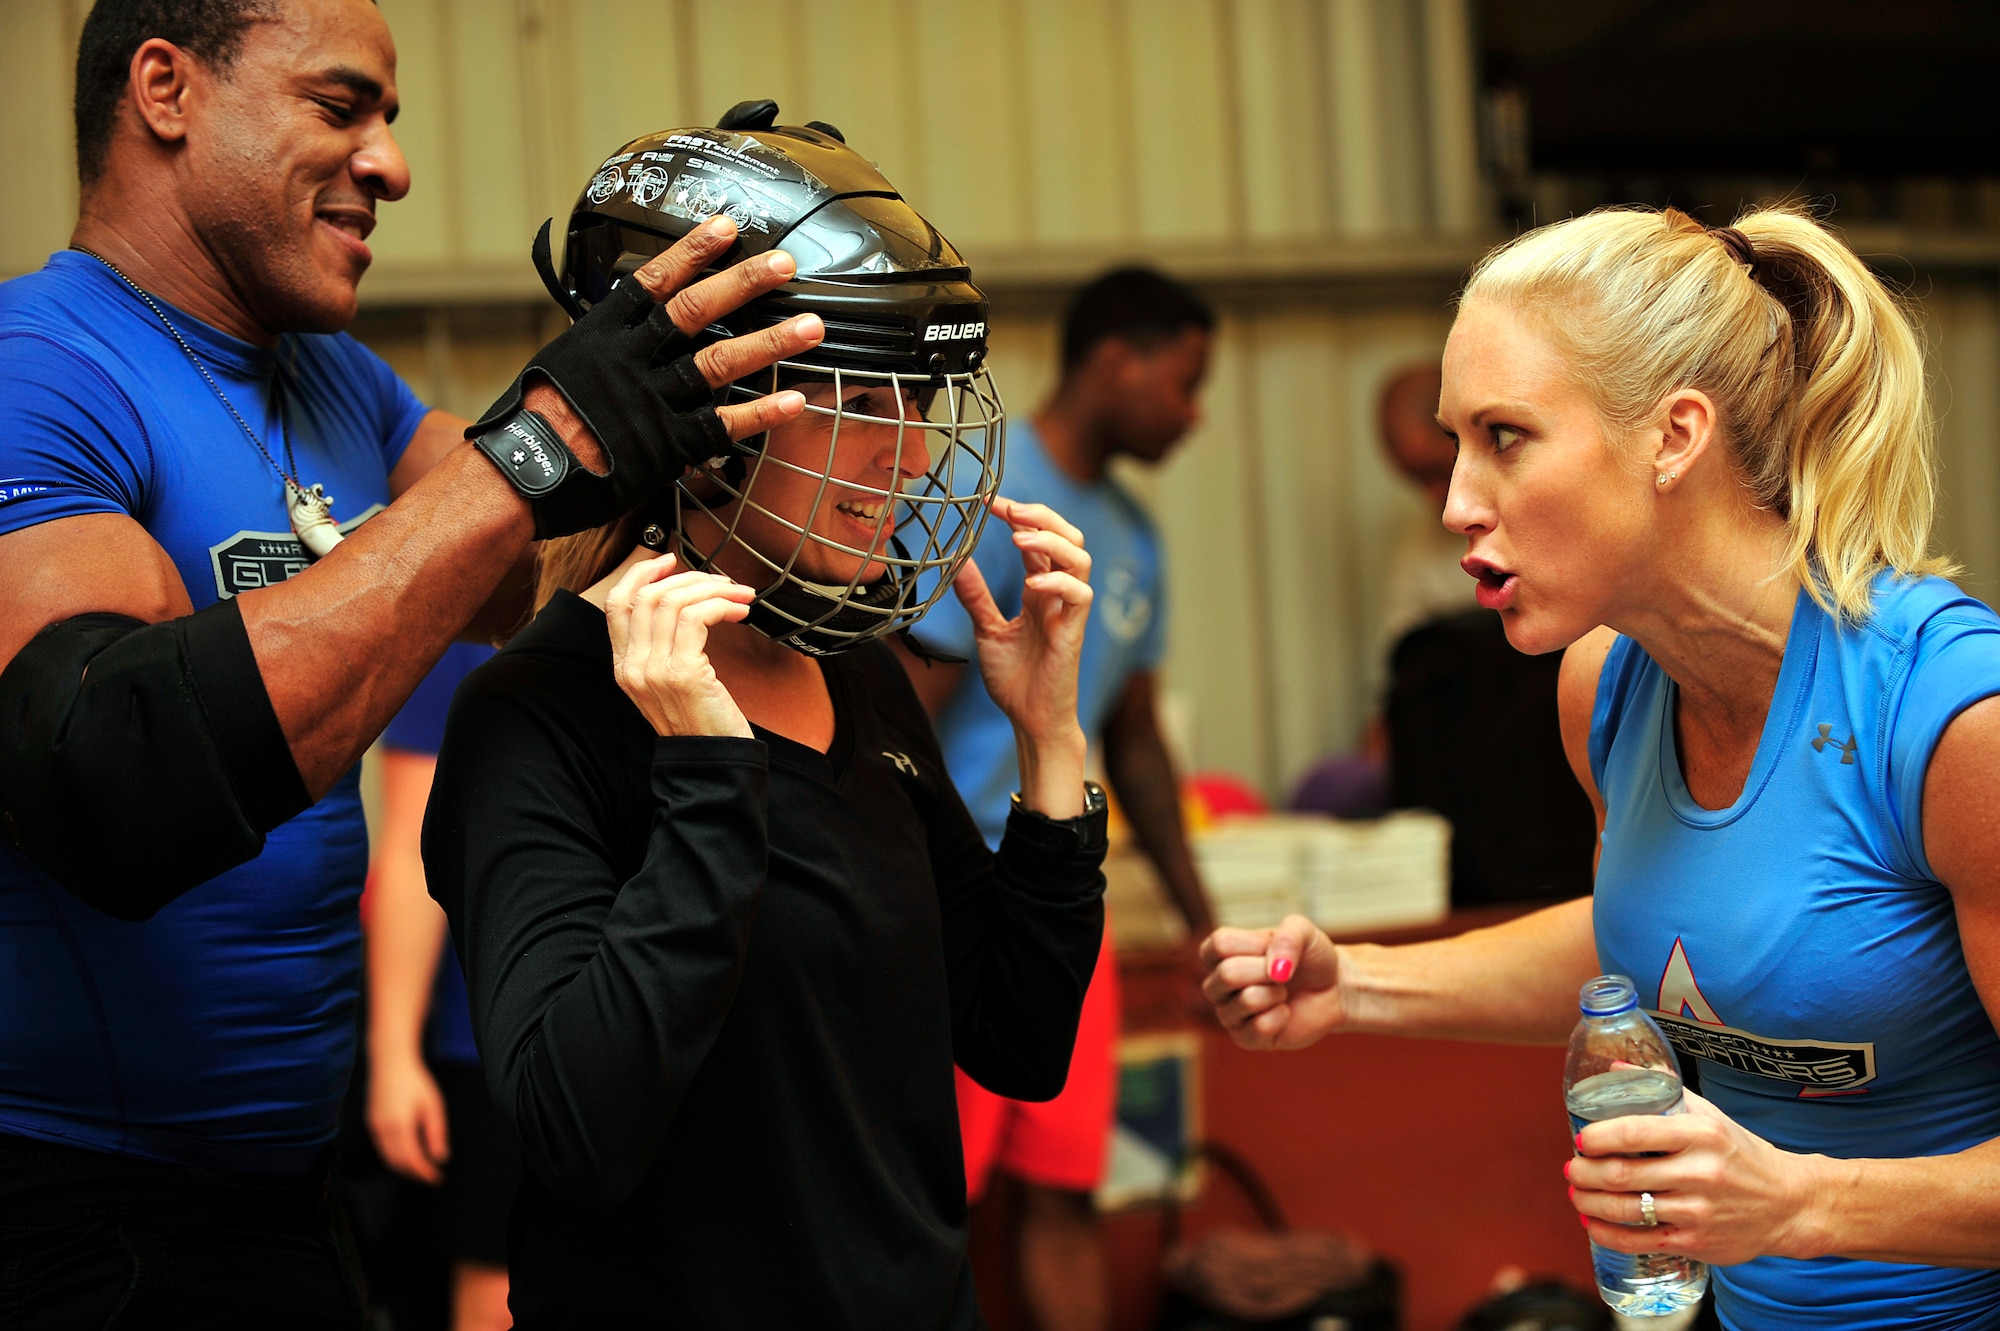 American Gladiators, Alex "Militia" Castro and Beth "Venom" Horn, prepare U.S. Air Force Col. Laura Lenderman, 380th Air Expeditionary Wing vice commander, for the Joust competition at an undisclosed location in Southwest Asia April 6, 2013. The Gladiators and Billy Blanks visited several bases in Southwest Asia during an Armed Forces Entertainment Fitness Tour. (U.S. Air Force photo by Tech. Sgt. Christina M. Styer/Released) 